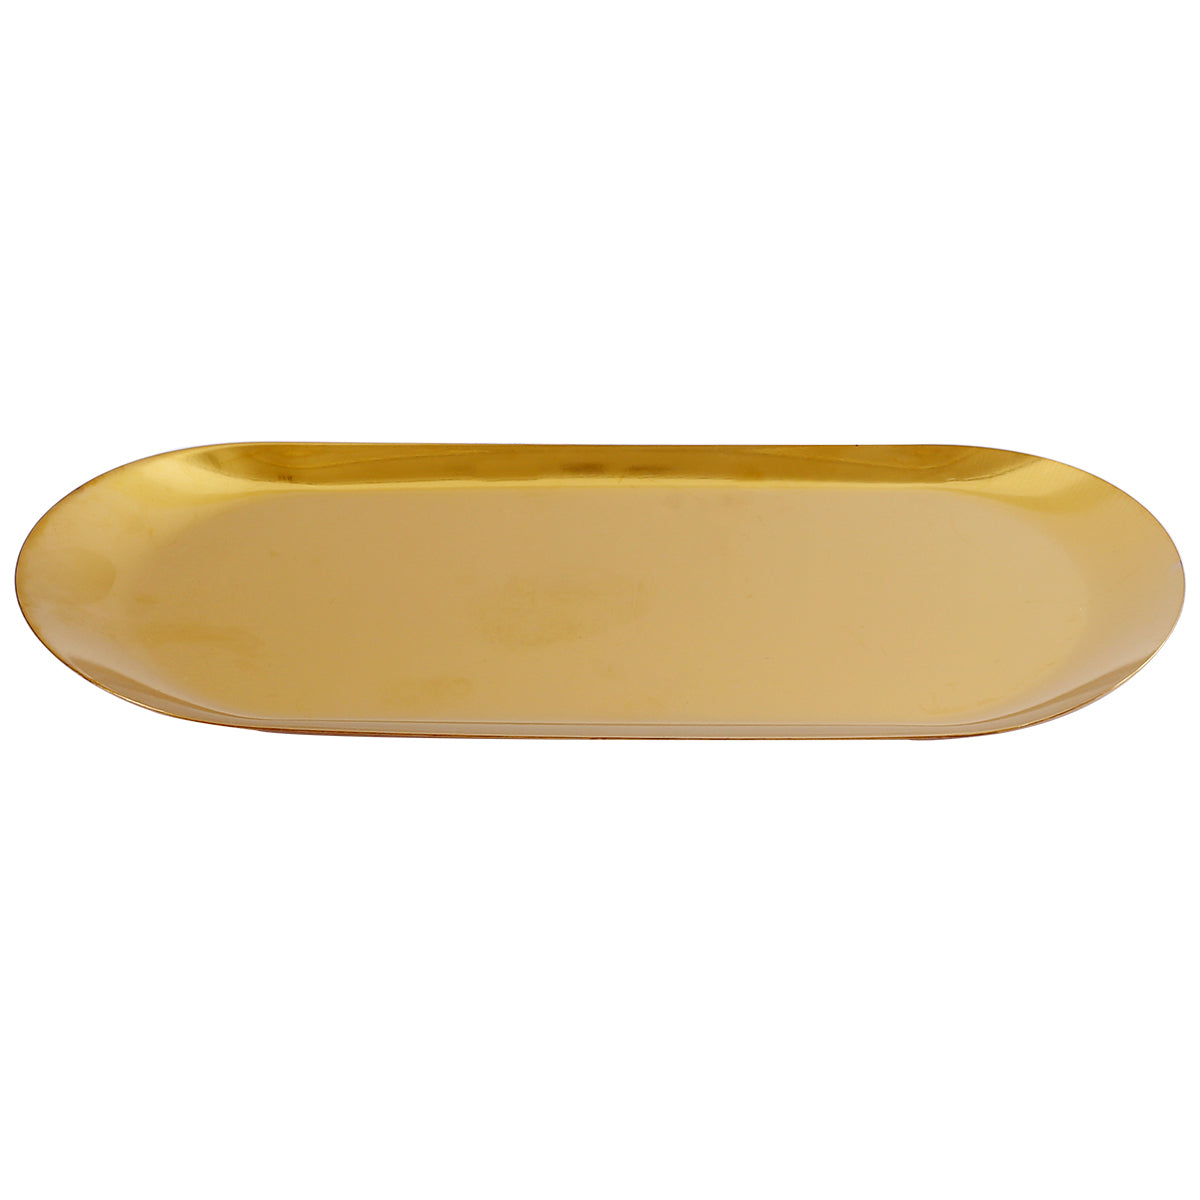 GOLDEN TRAY OVAL 30 X 12 Cm